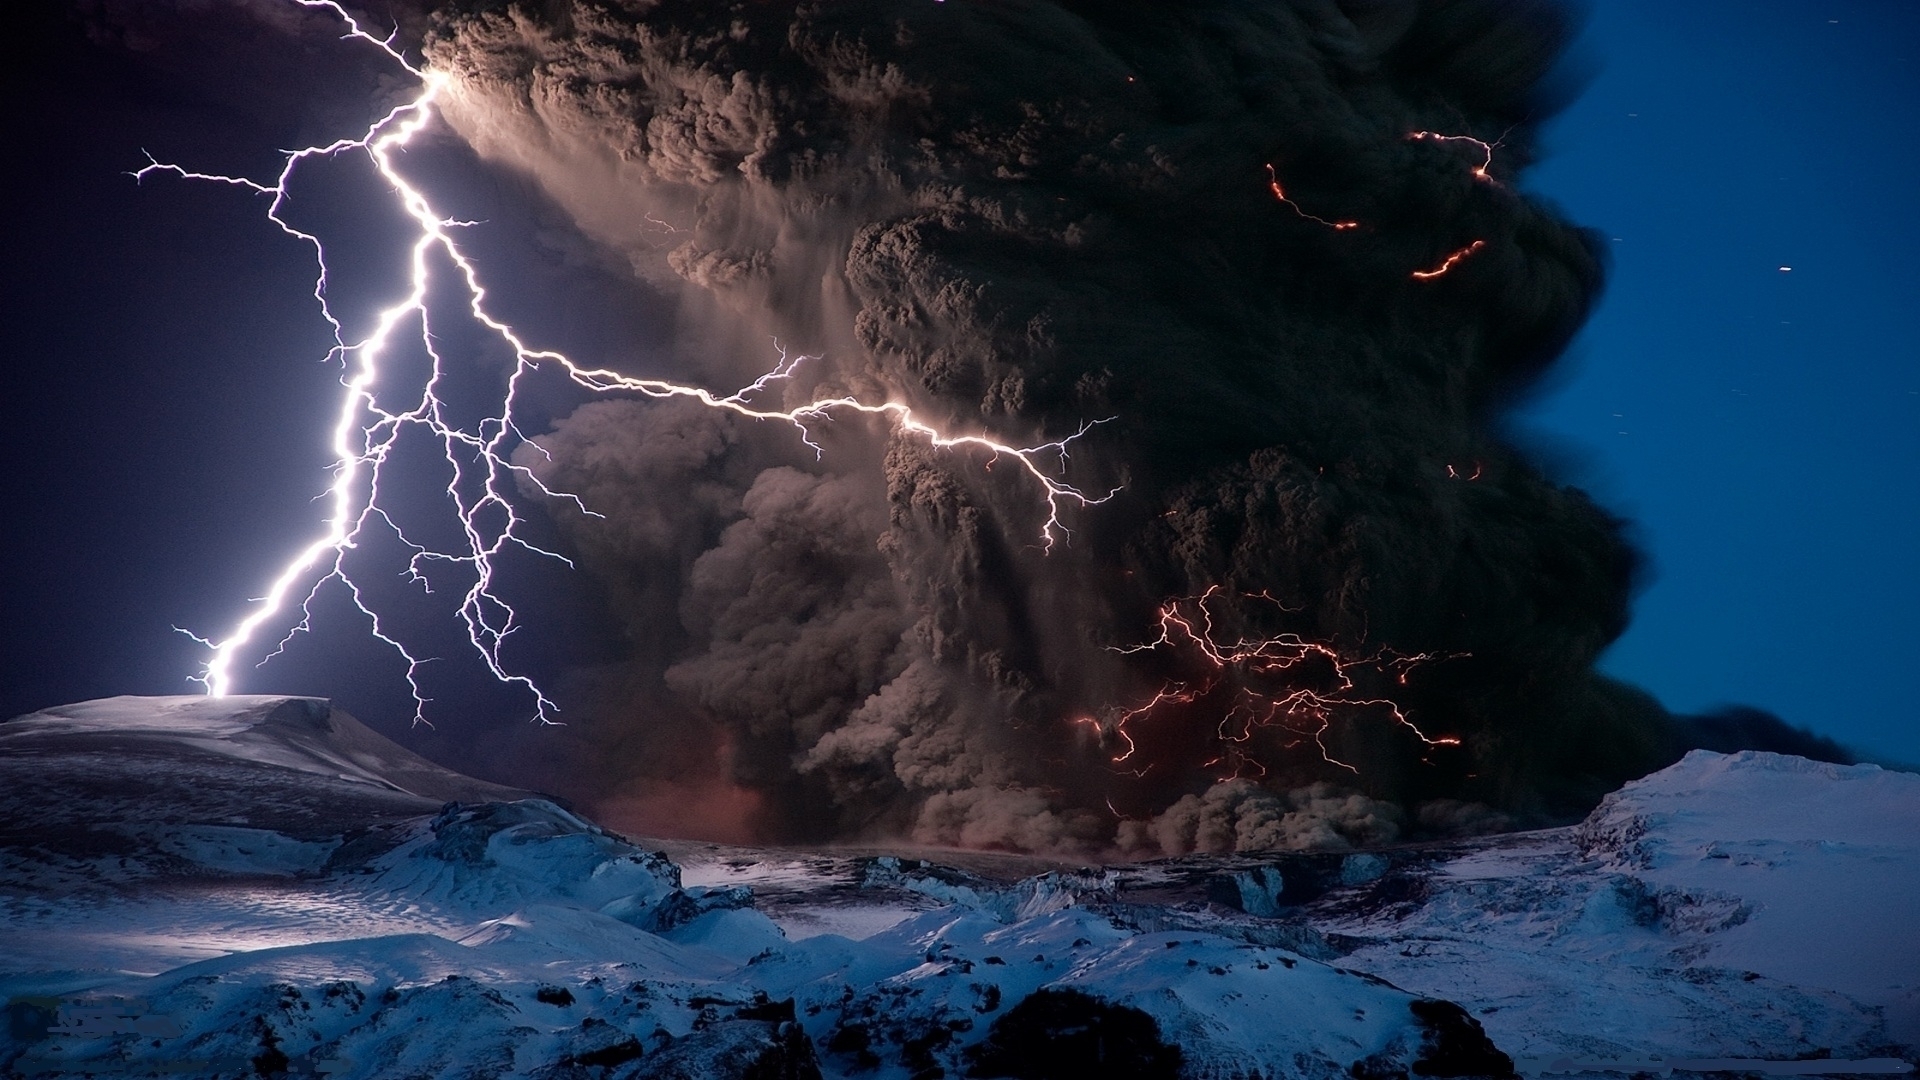 nature, Landscapes, Mountains, Volcano, Smoke, Explosion, Lightning, Snow, Fire, Flames, Night, Stars Wallpaper